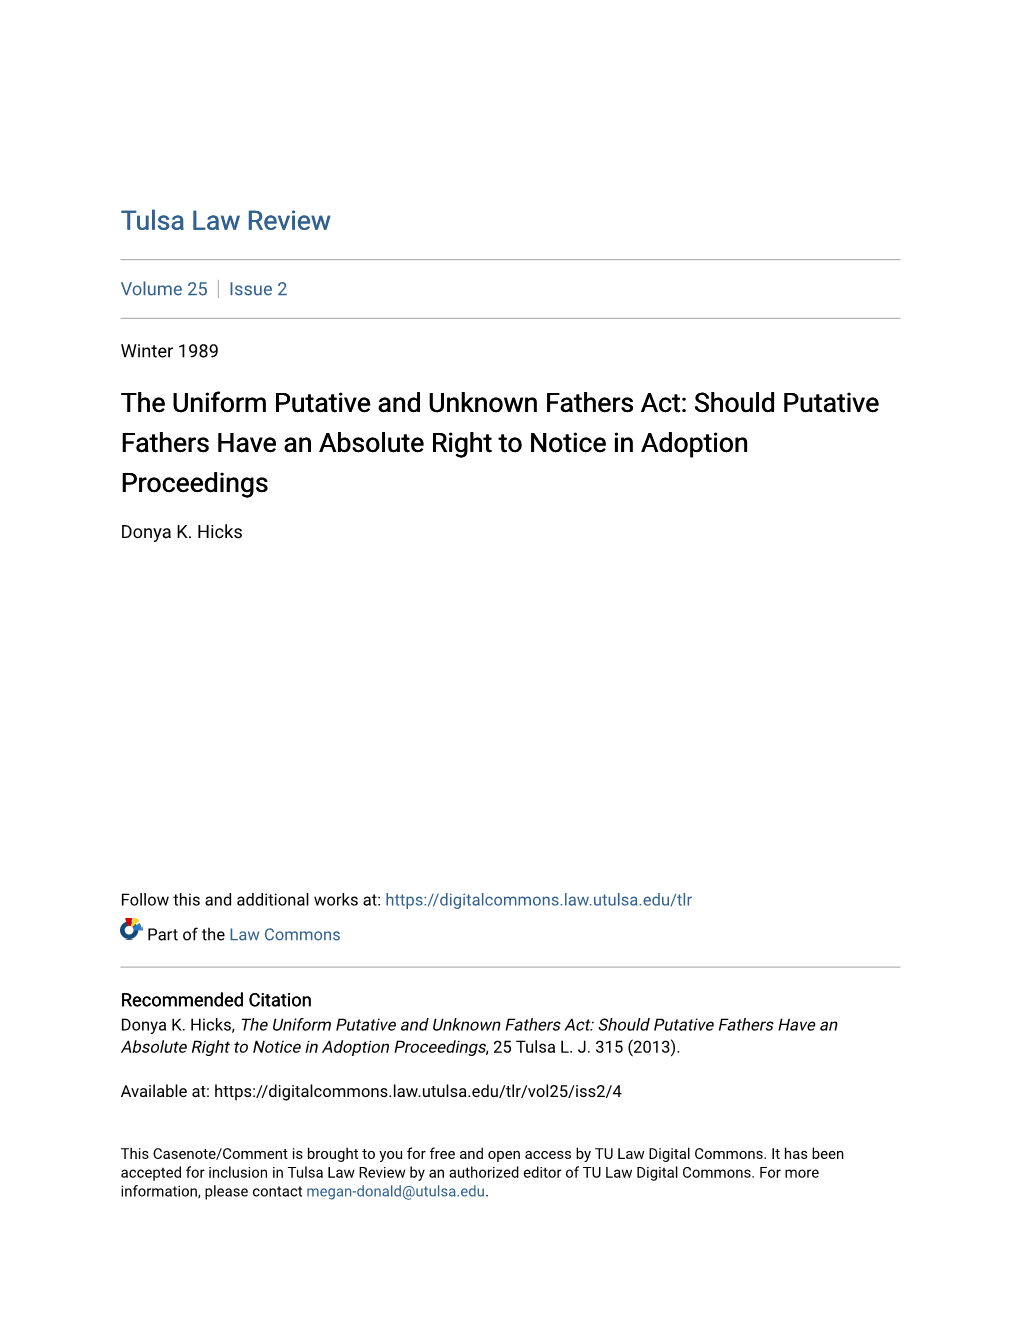 The Uniform Putative and Unknown Fathers Act: Should Putative Fathers Have an Absolute Right to Notice in Adoption Proceedings